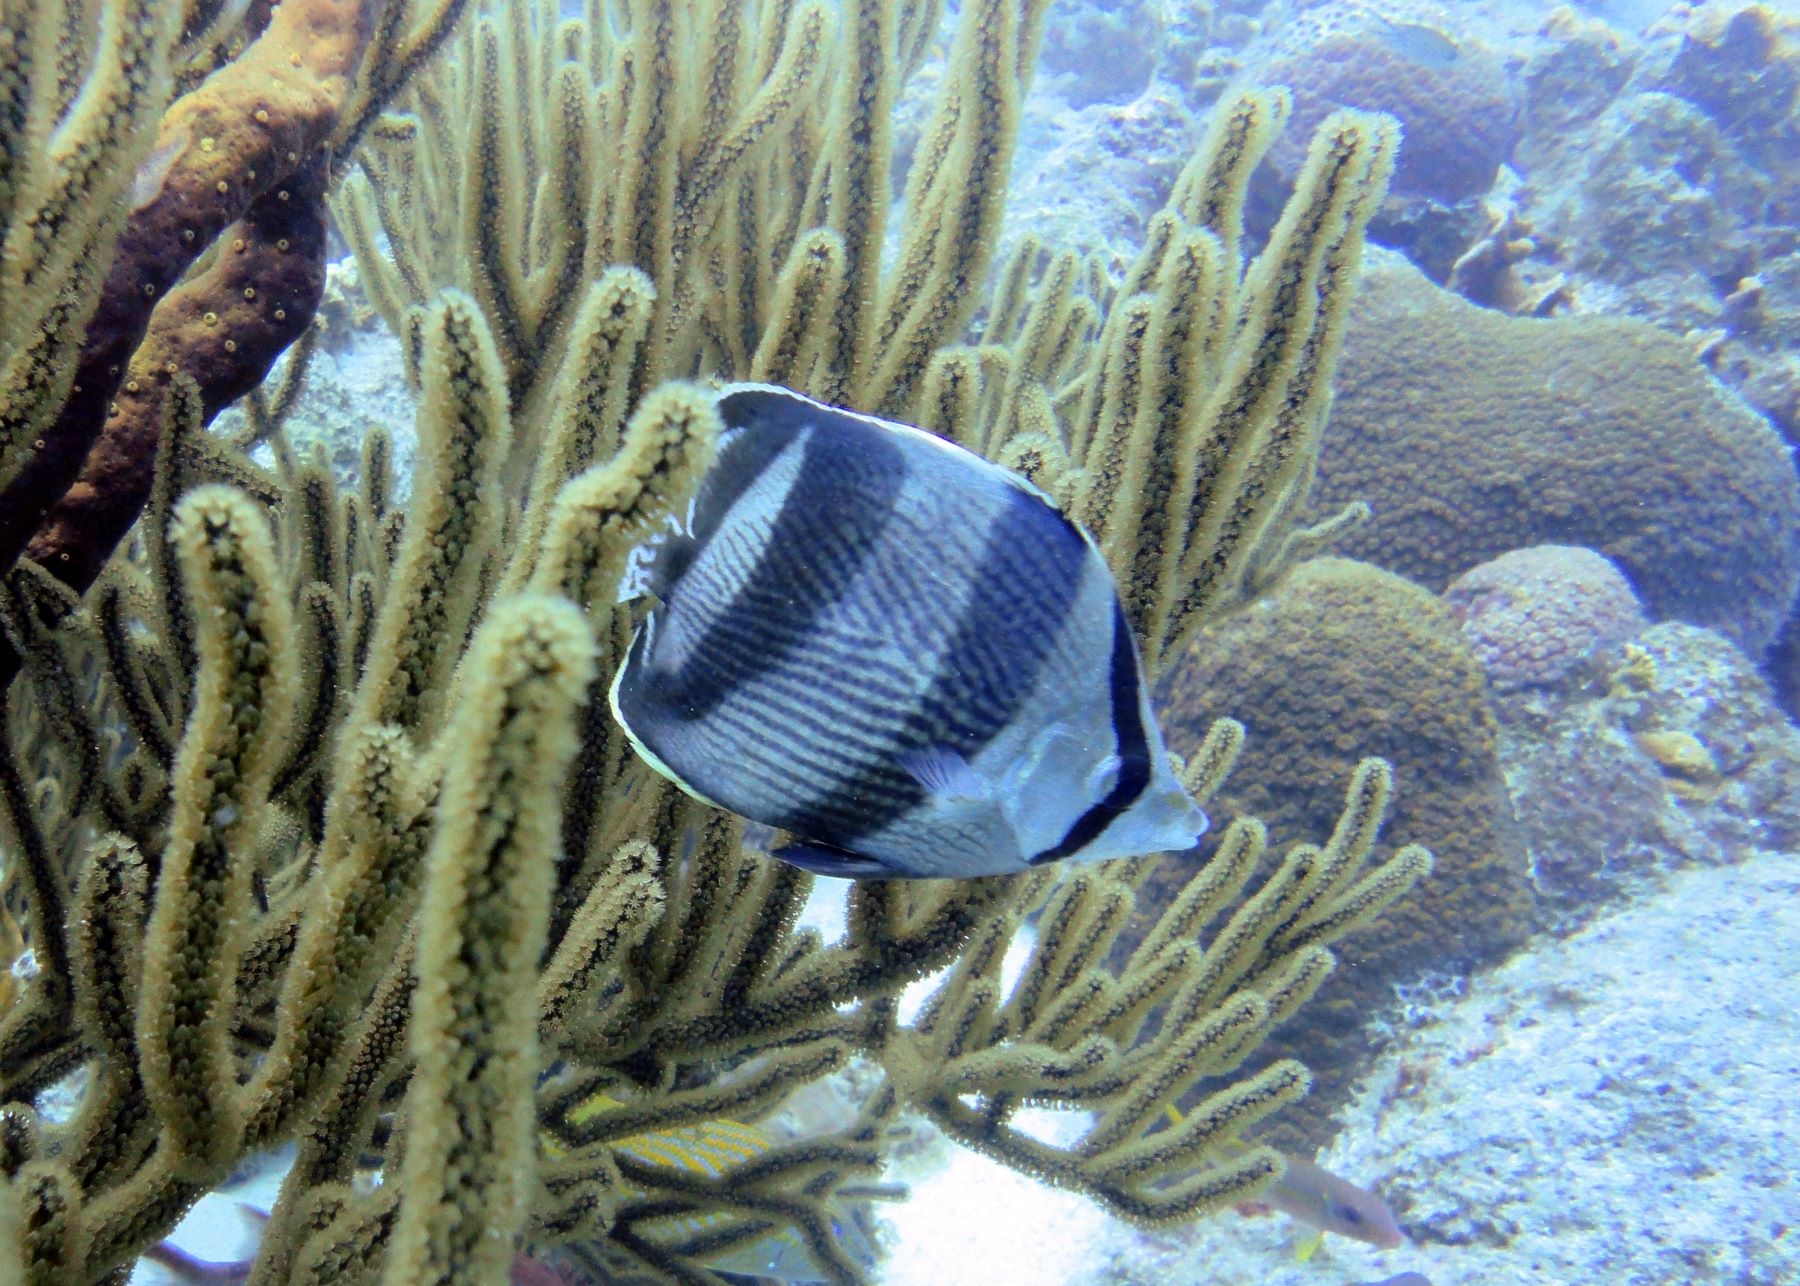 A branded butterfly fish with blue stripes is seen during a dive.